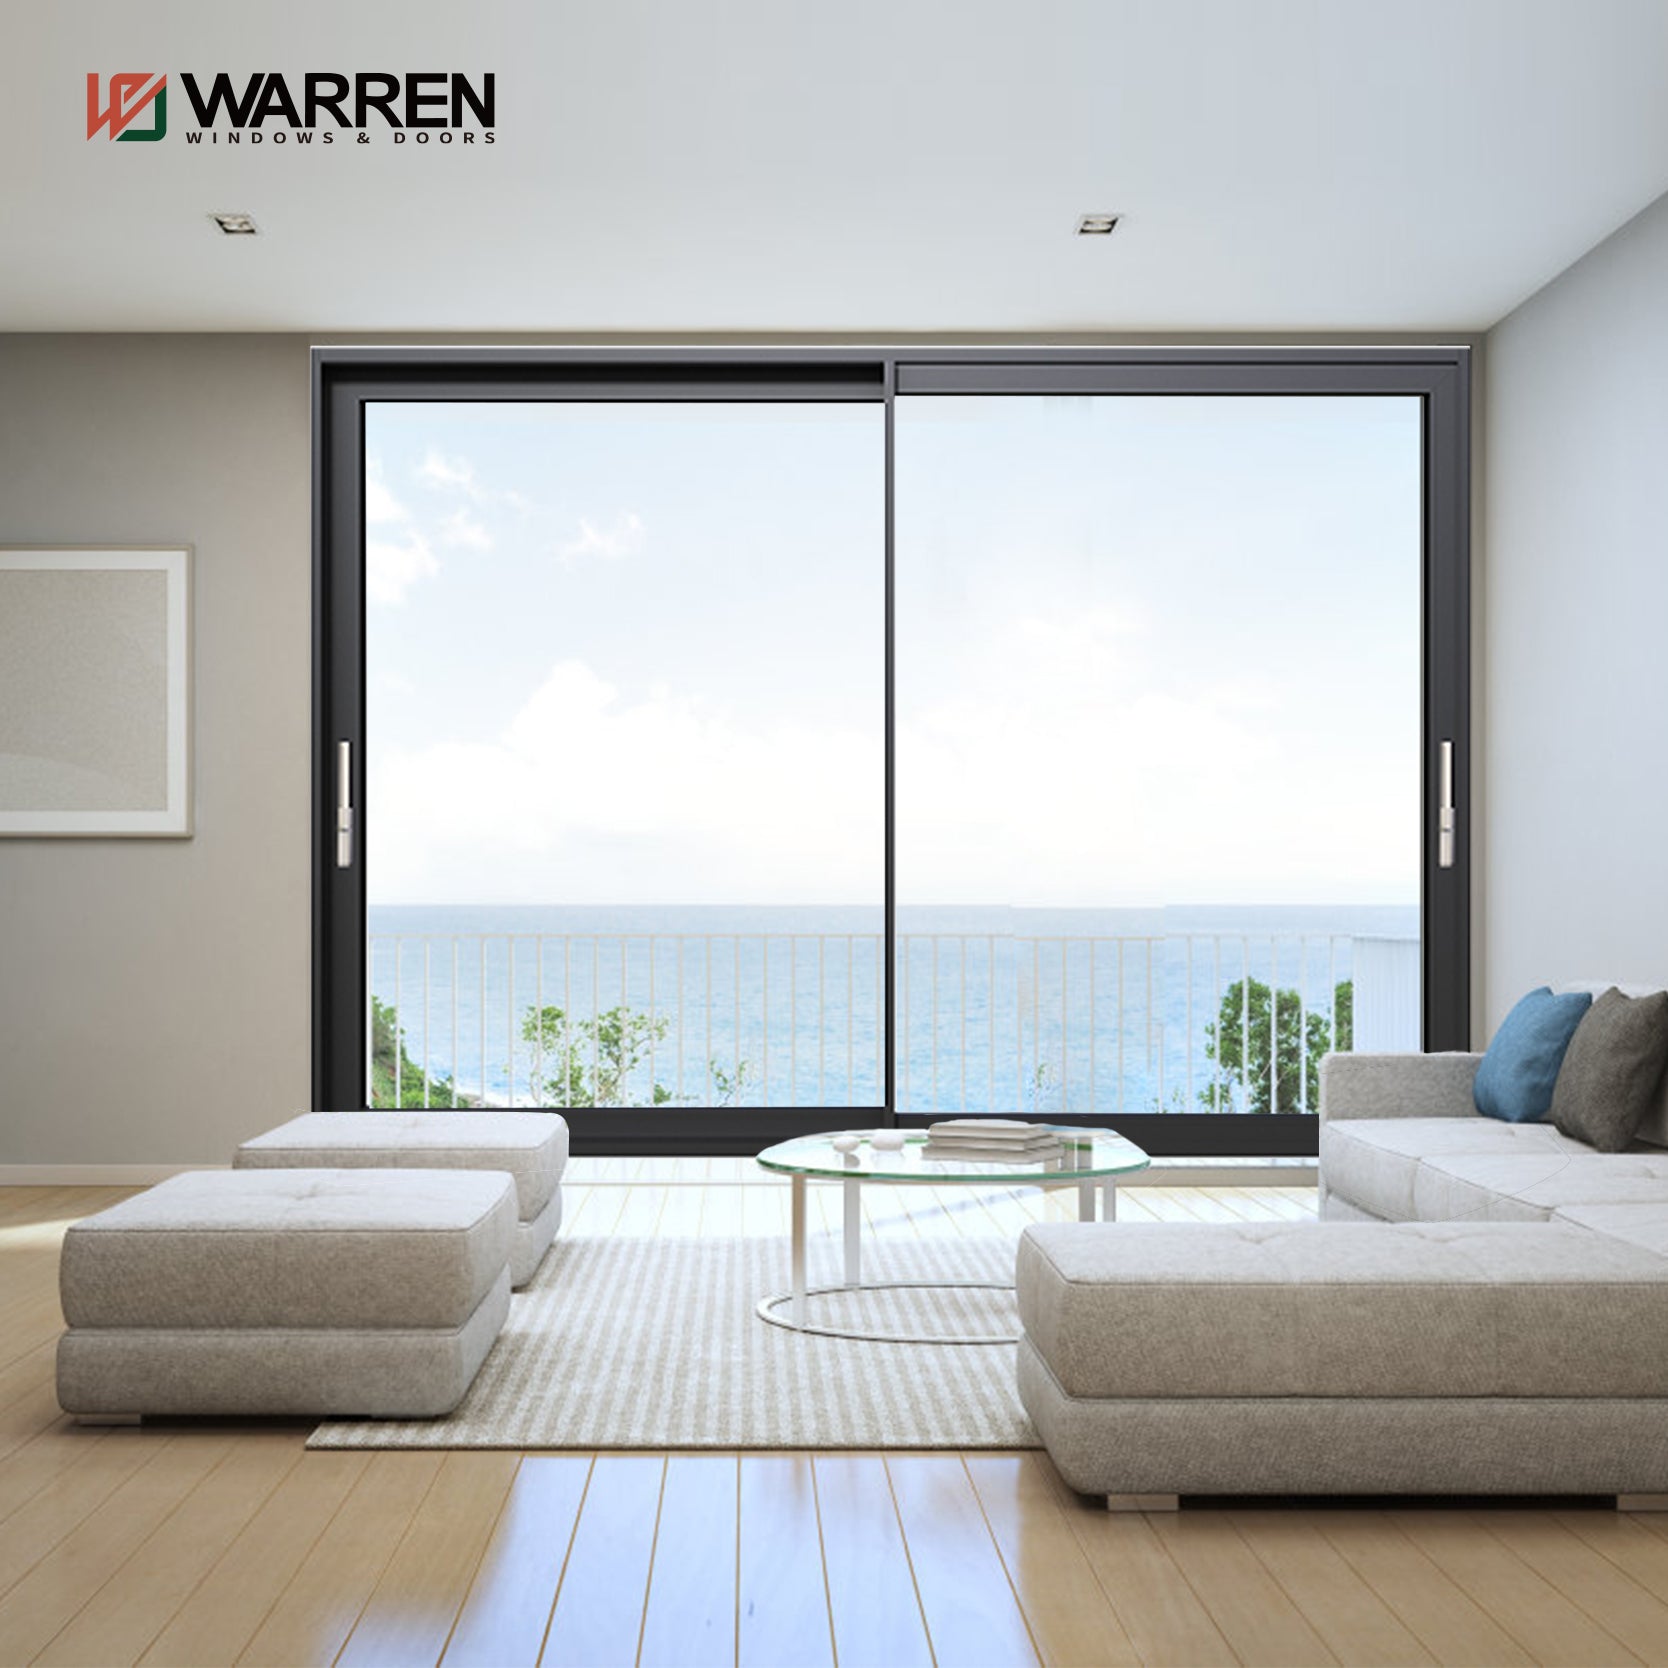 Warren 96 sliding patio door with built in blinds tempered laminated Double Glazed Pane